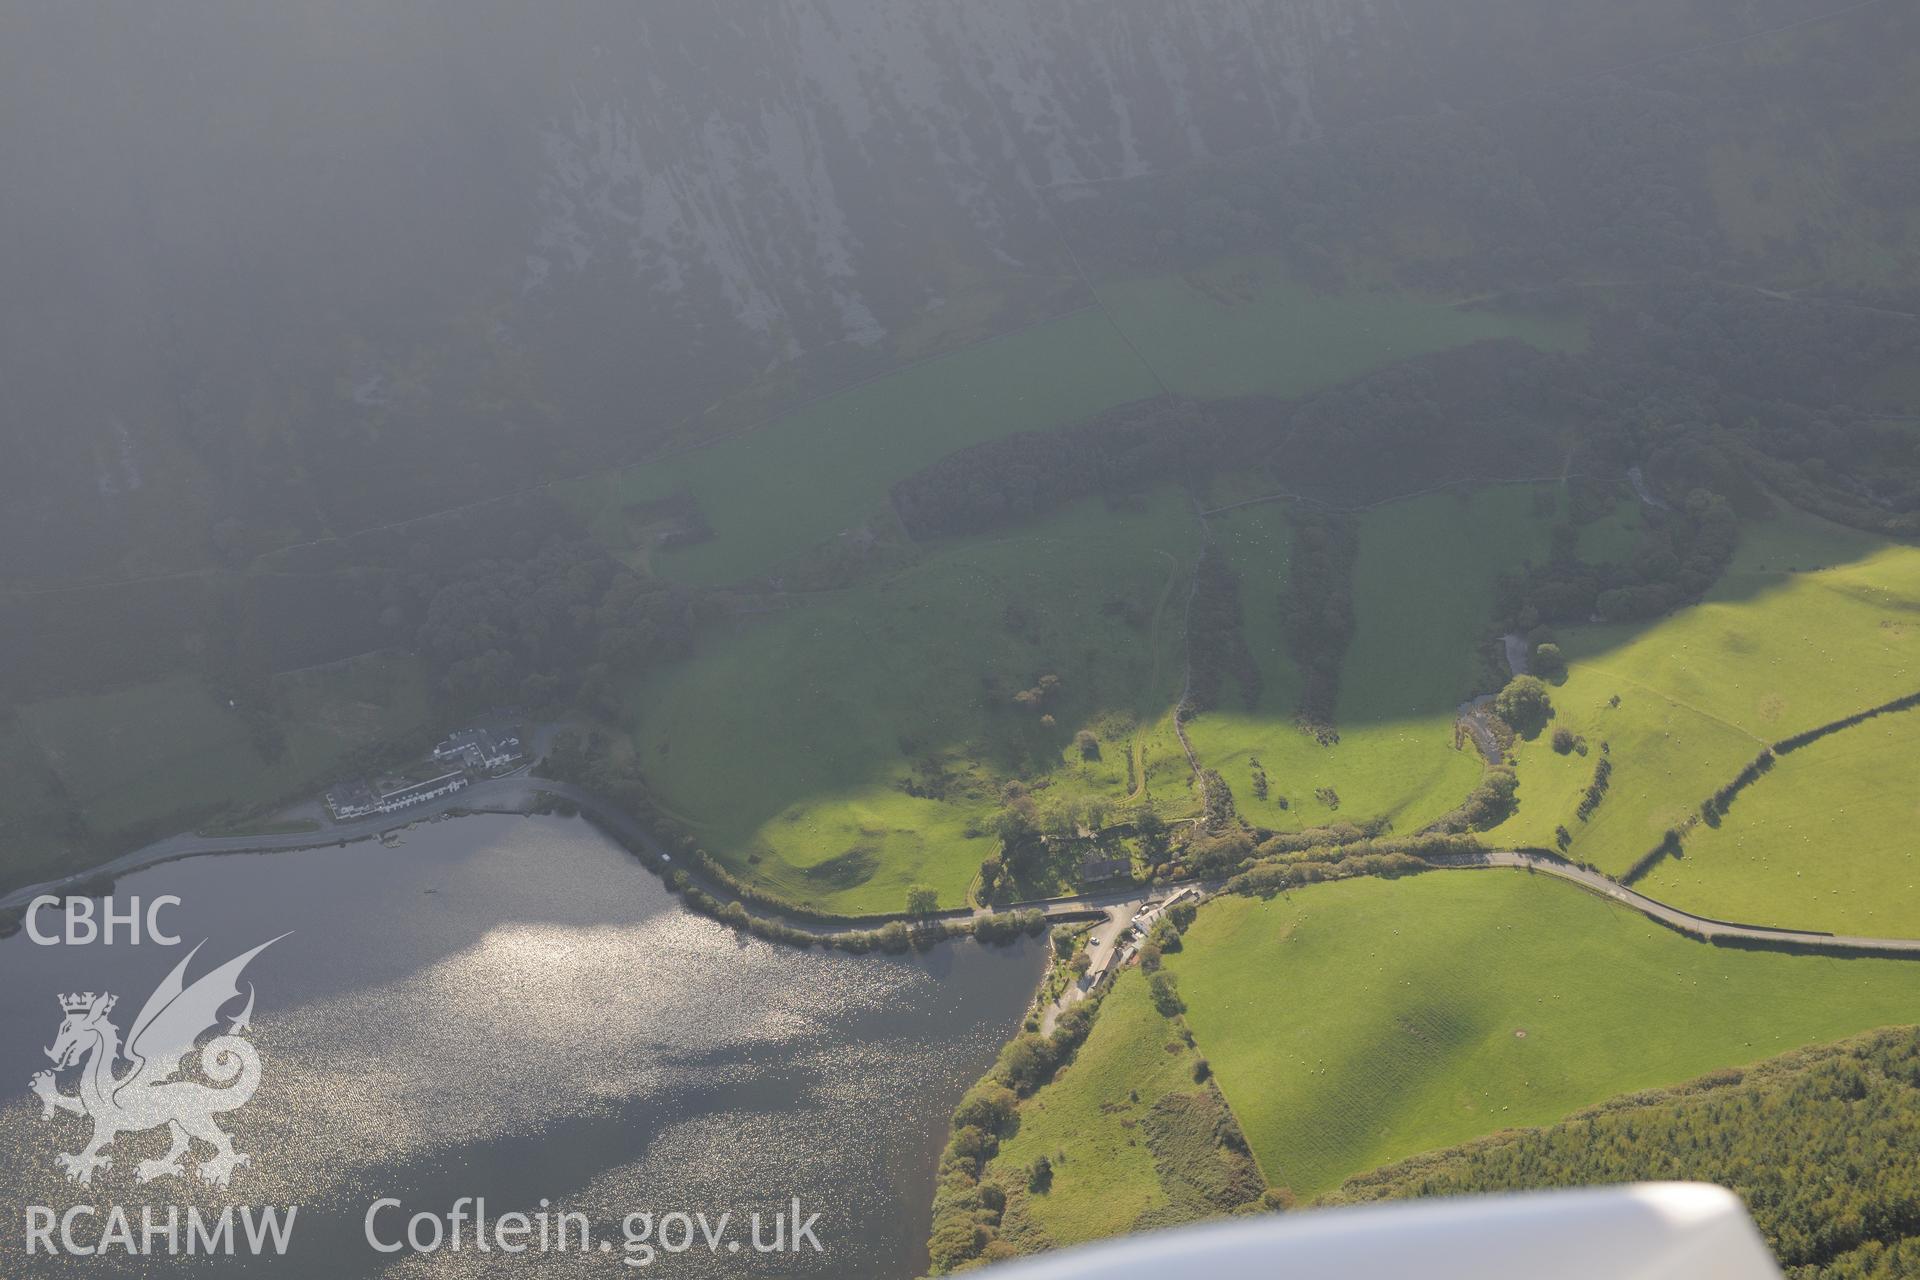 St. Mary's church, Ty'n-y-Cornel Hotel & Tal-y-Llyn enclosure or Roman fortlet, on shore of Tal-y-Llyn lake, Corris. Oblique aerial photograph taken during Royal Commission's programme of archaeological aerial reconnaissance by Toby Driver on 2/10/2015.